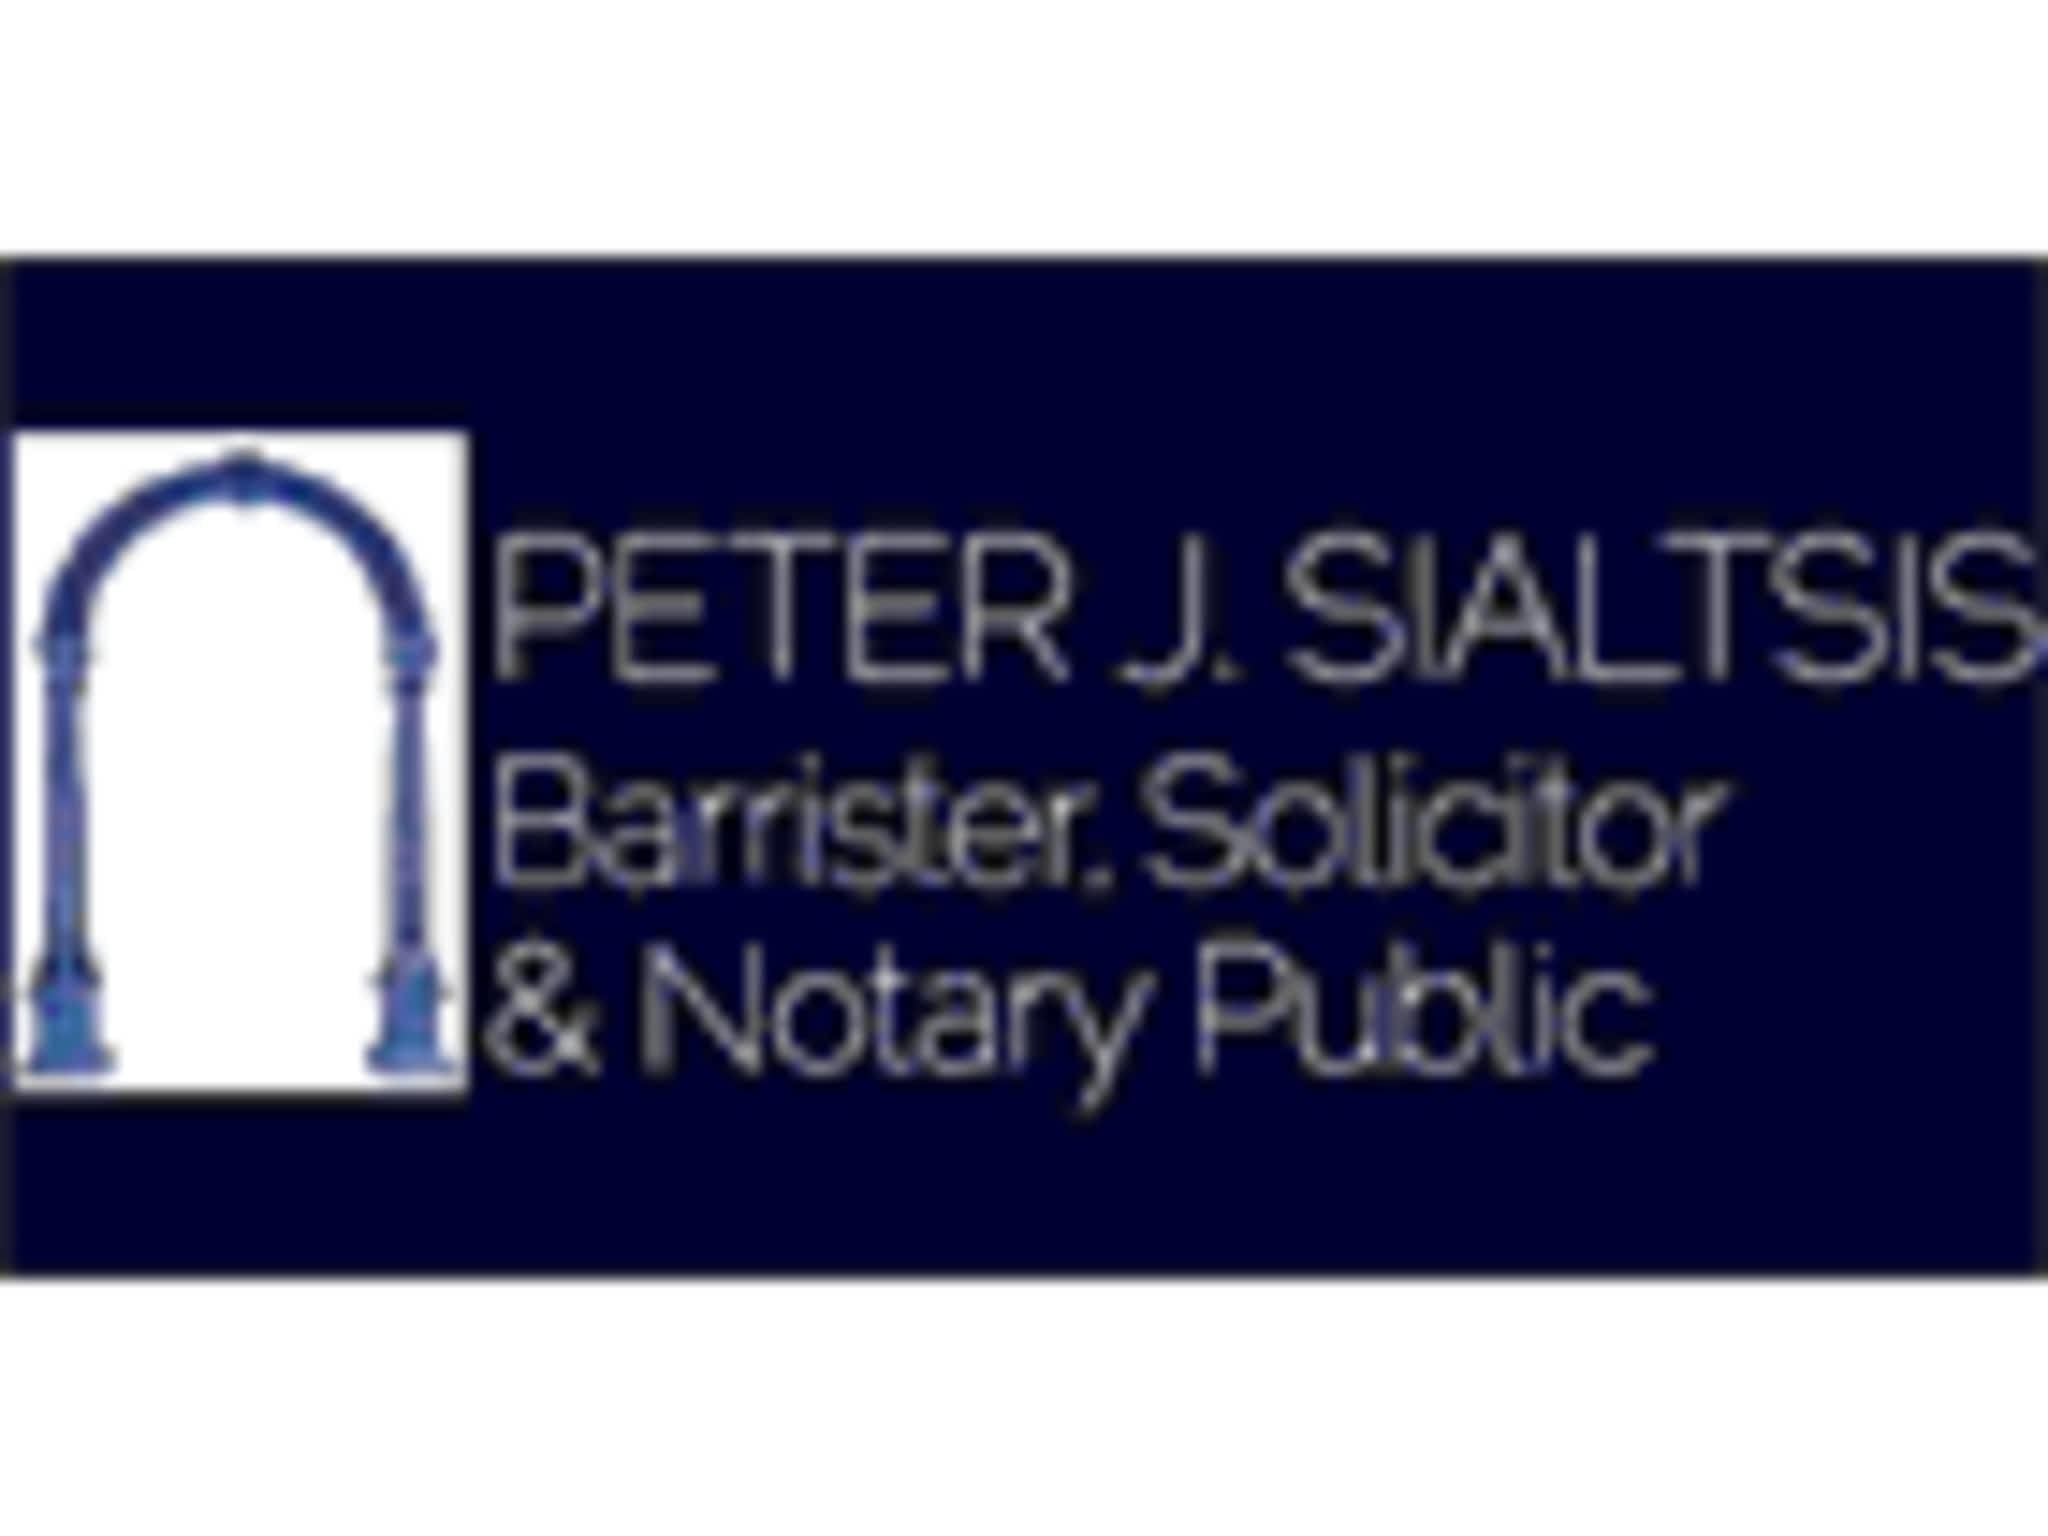 photo Peter J Sialtsis Barrister Solicitor & Notary Public